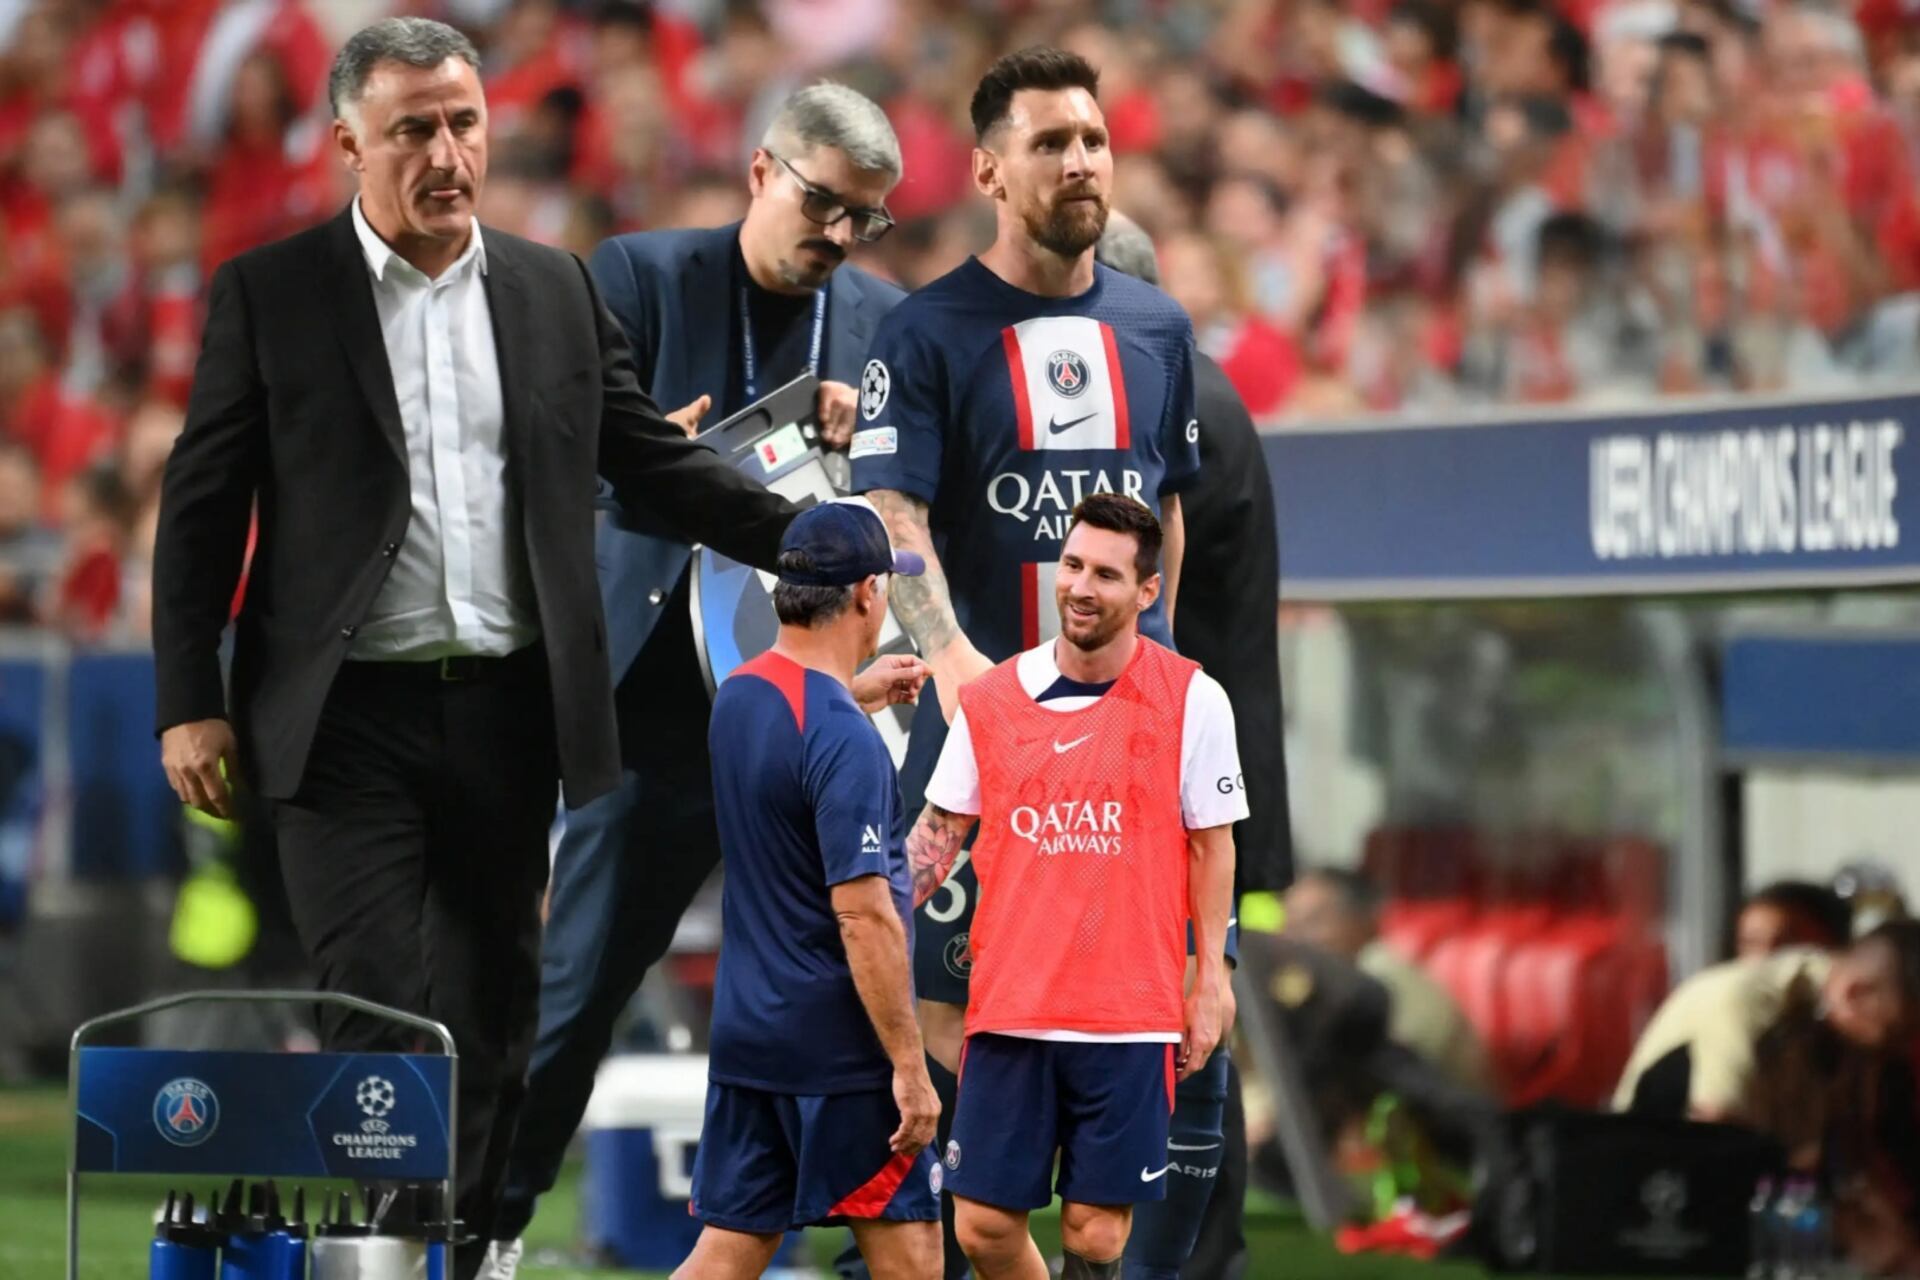 Even though Messi was mistreated at PSG, his former coach reveals this amazing gesture that proves his true class 